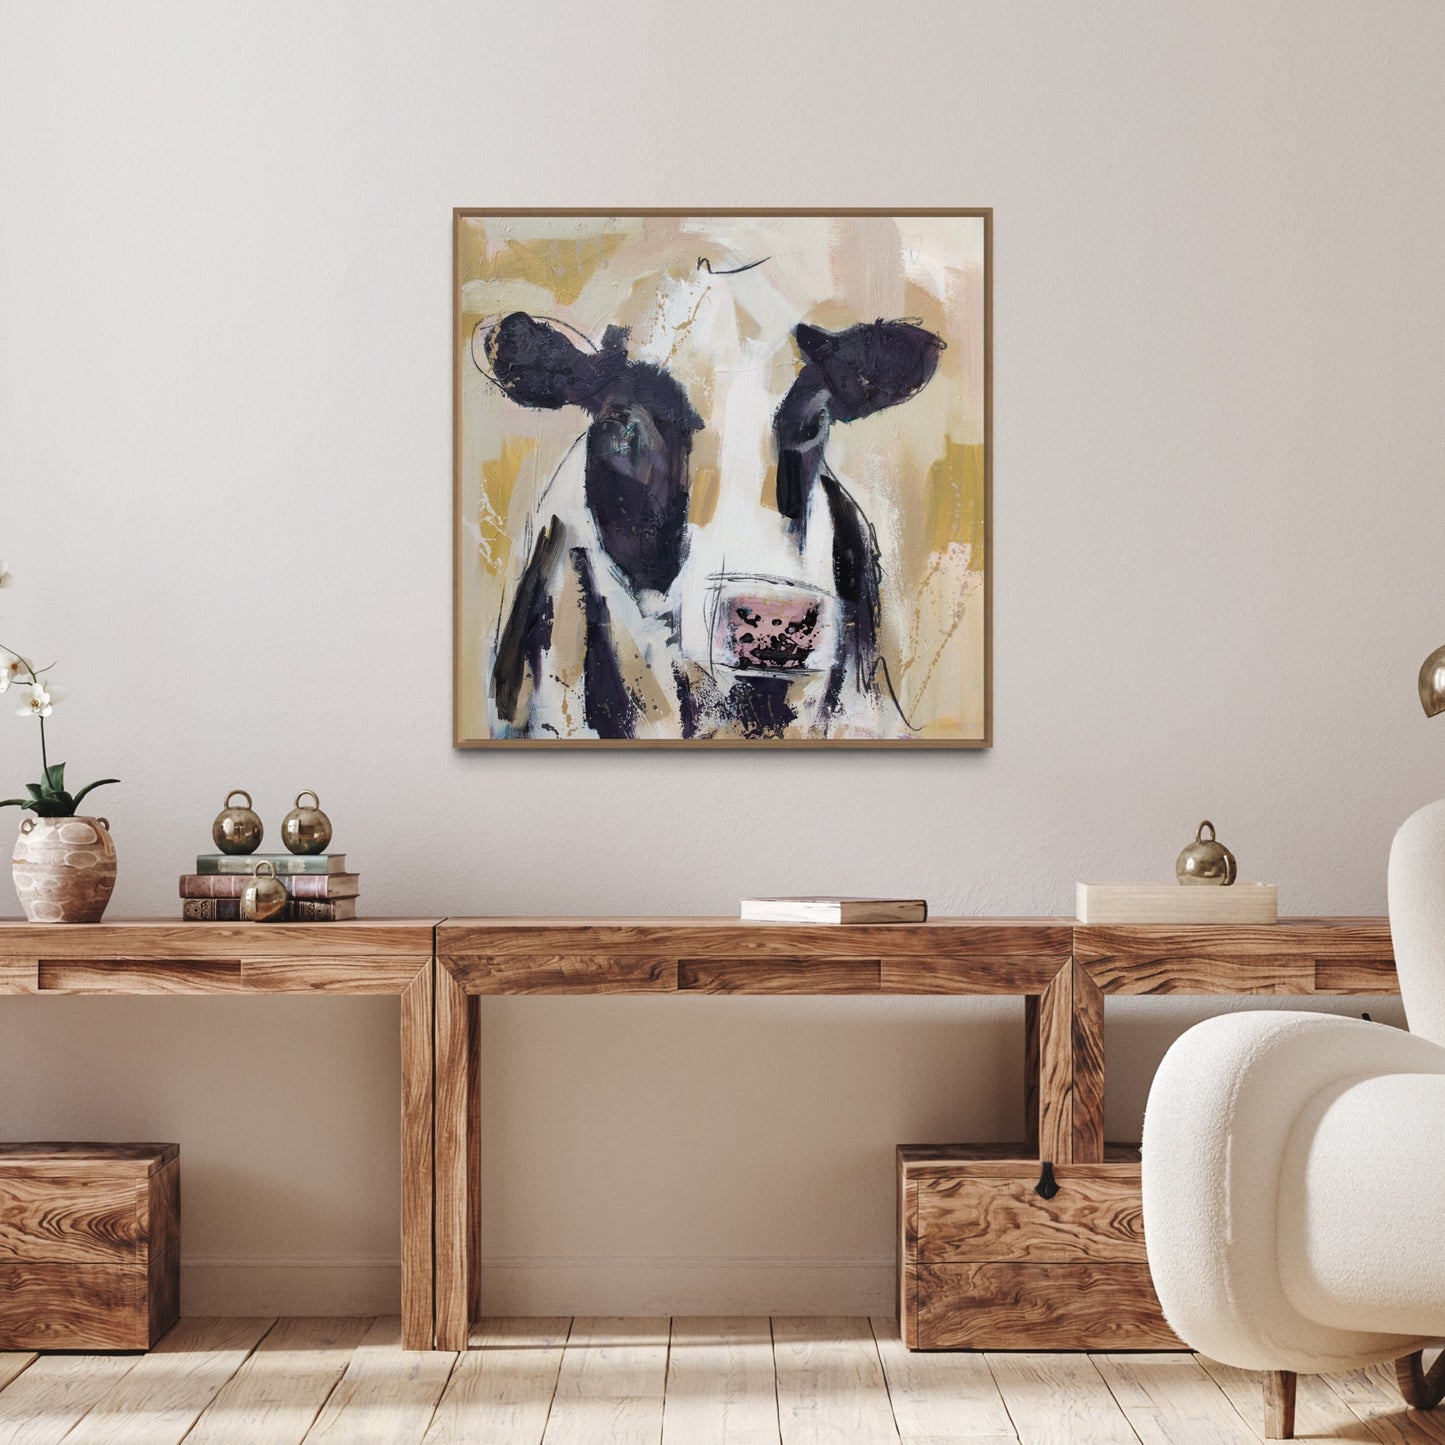 Shadow - Abstract Cow by Australian Artist Rose Hewartson Original Abstract Painting on Canvas Framed 96x123 cm Statement Piece